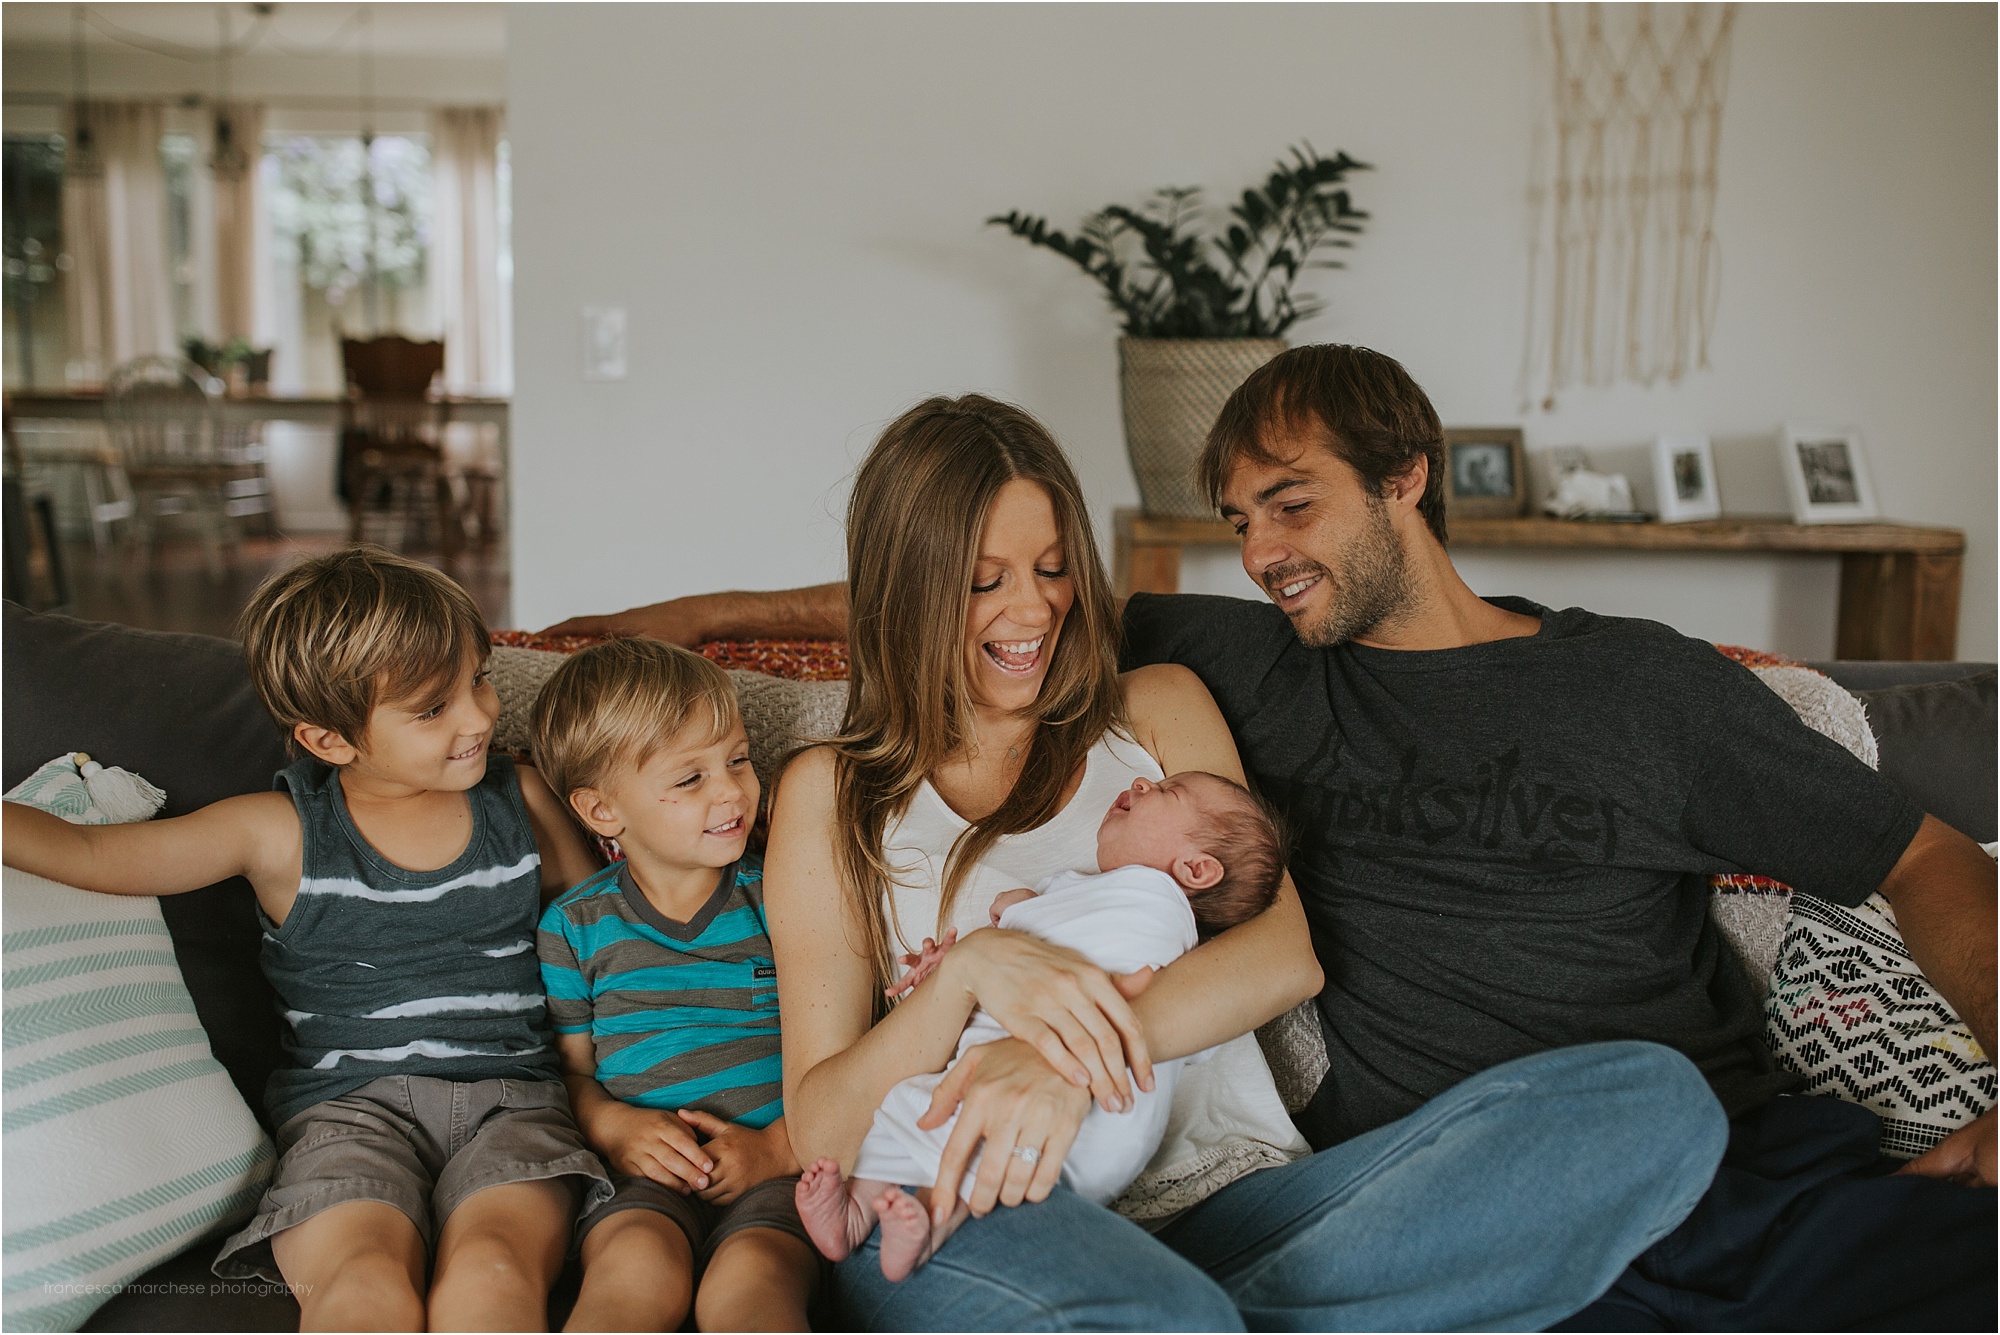 Family with newborn in an at home setting